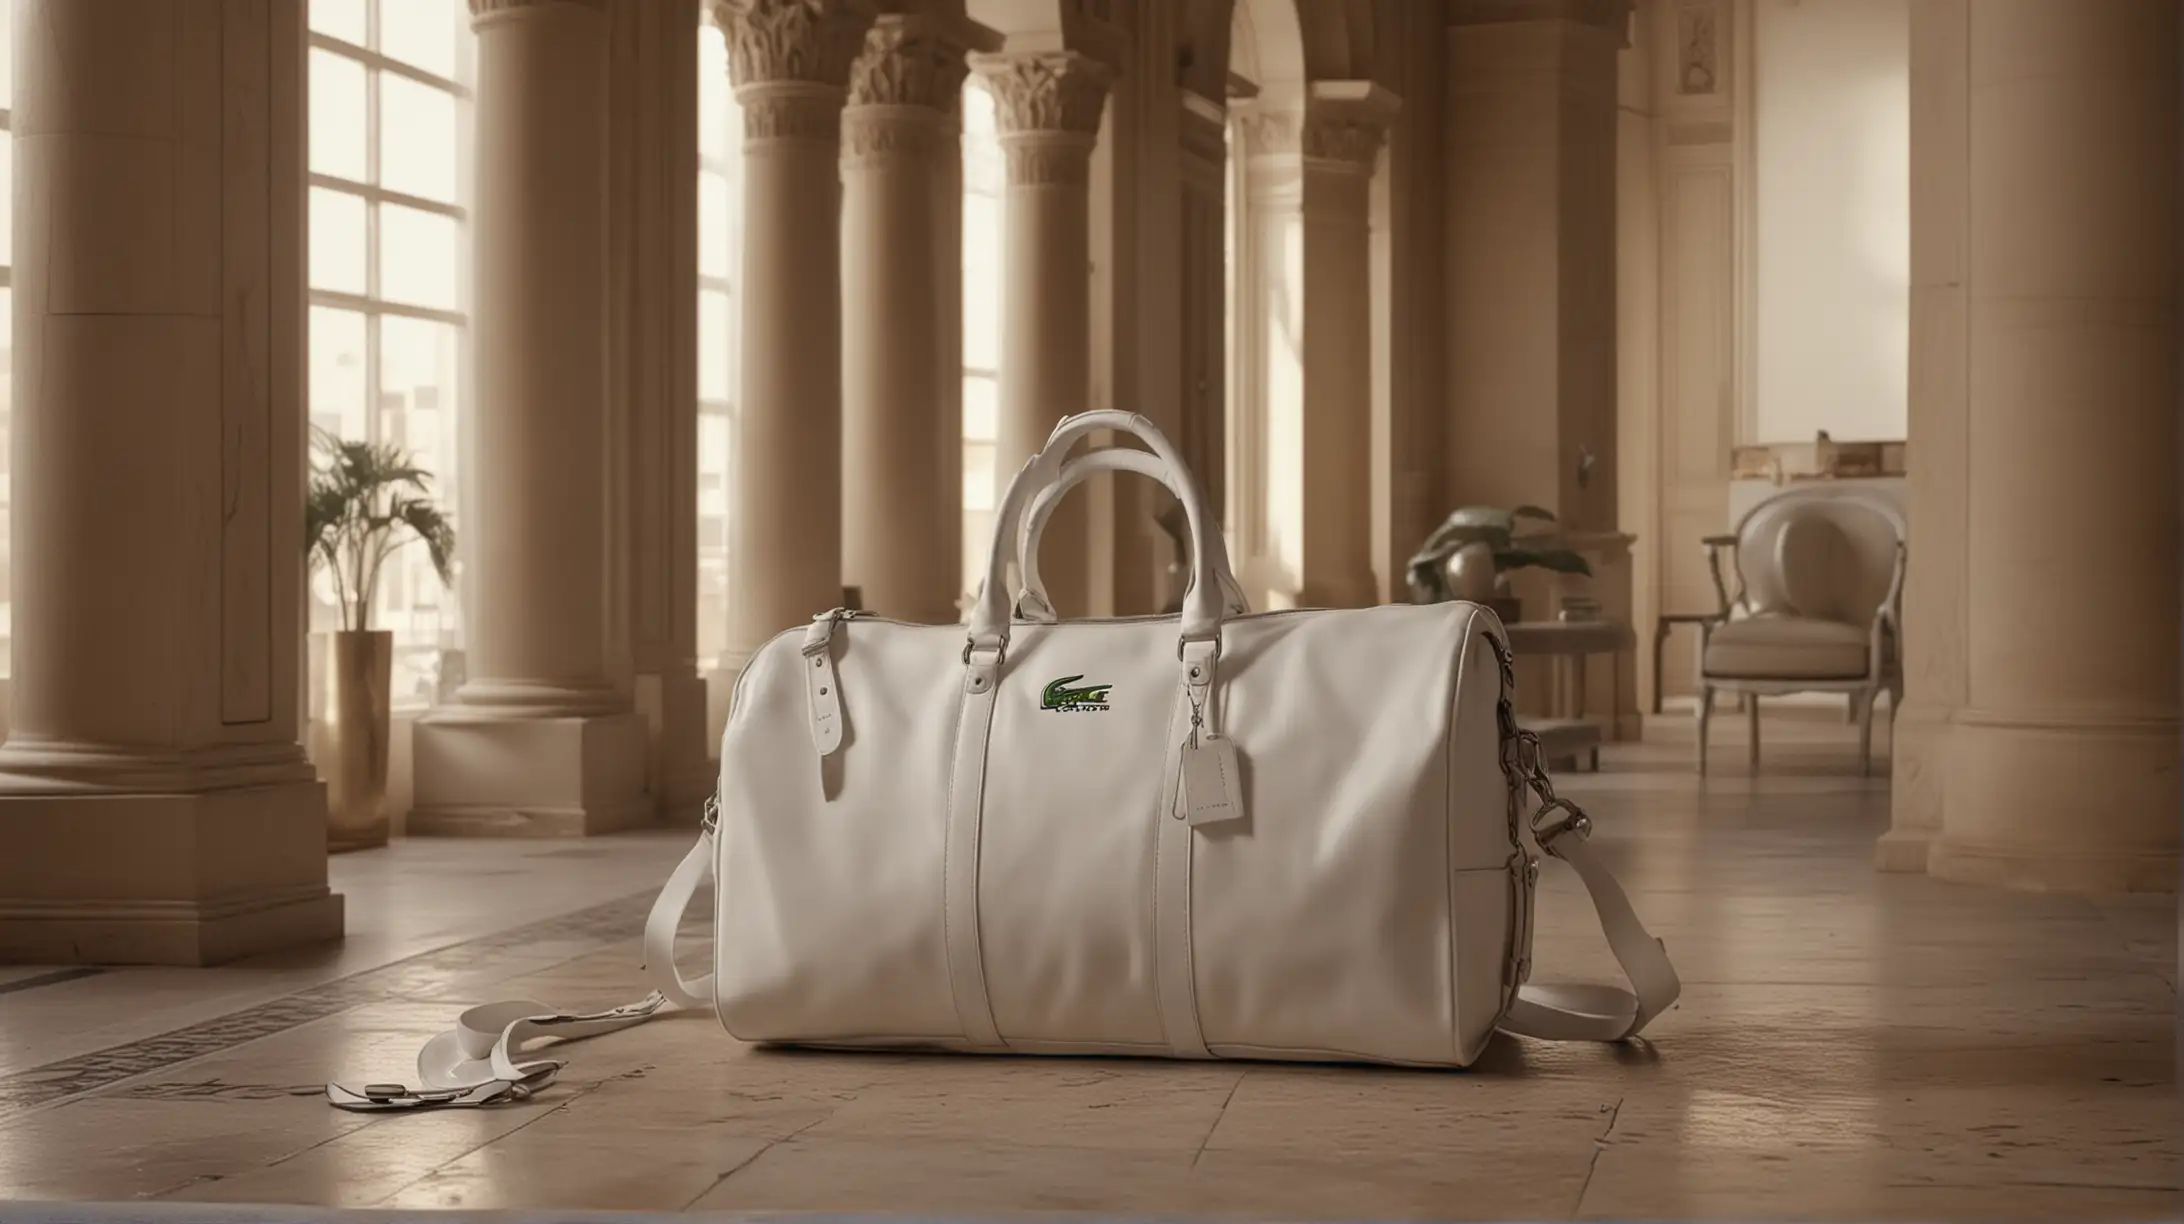 Luxurious Lacoste Training Bags in Egyptian Interior Cinematic Setting